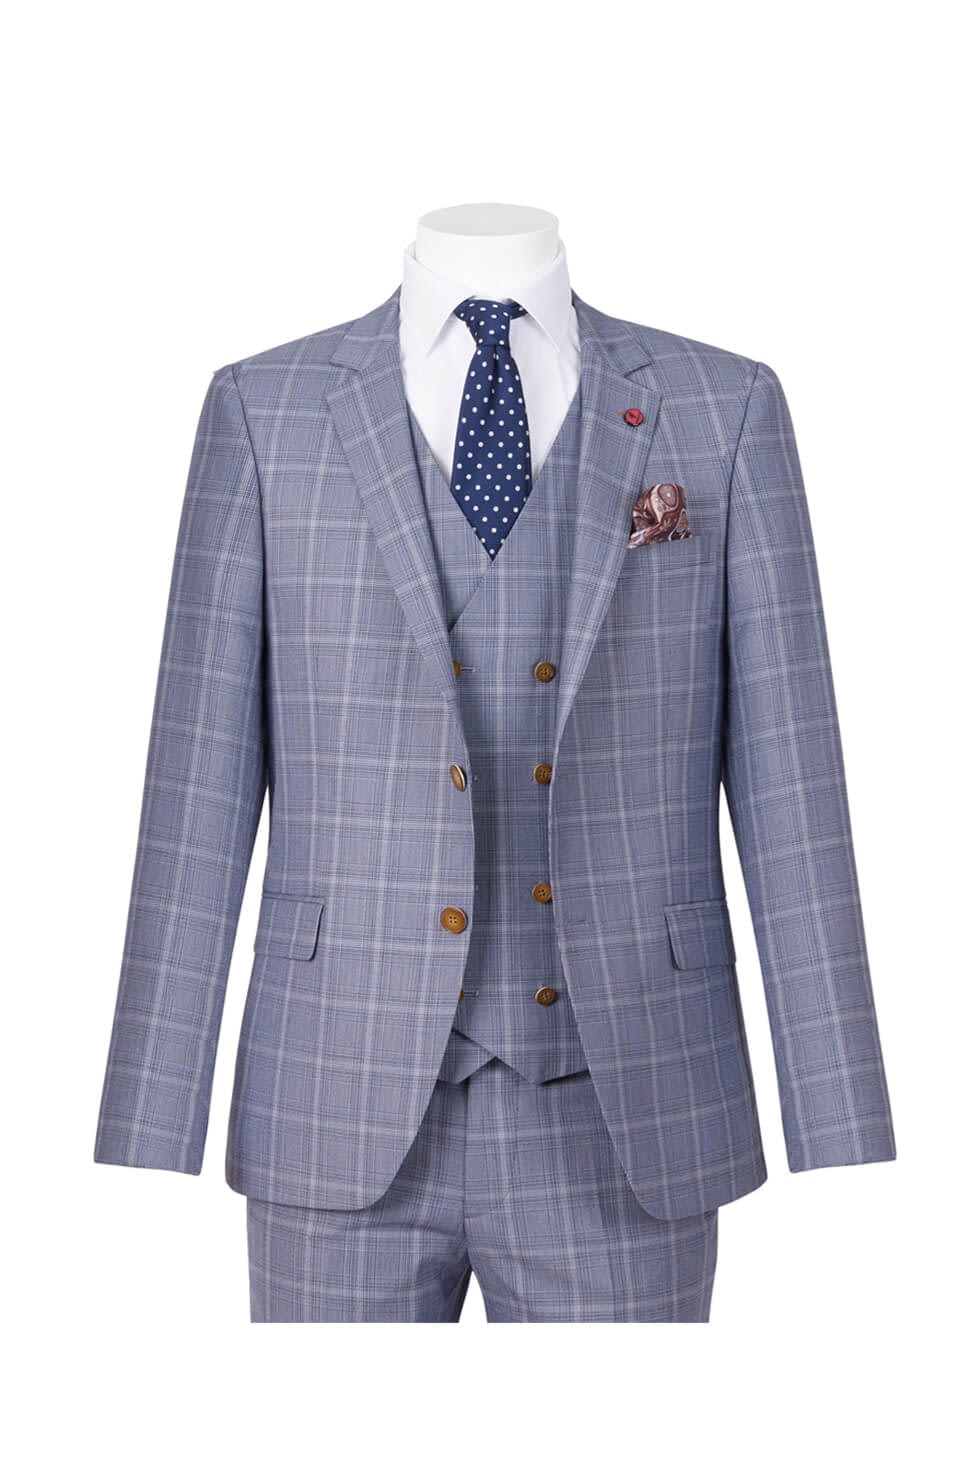 Ed Oliver Three Piece Check Suit